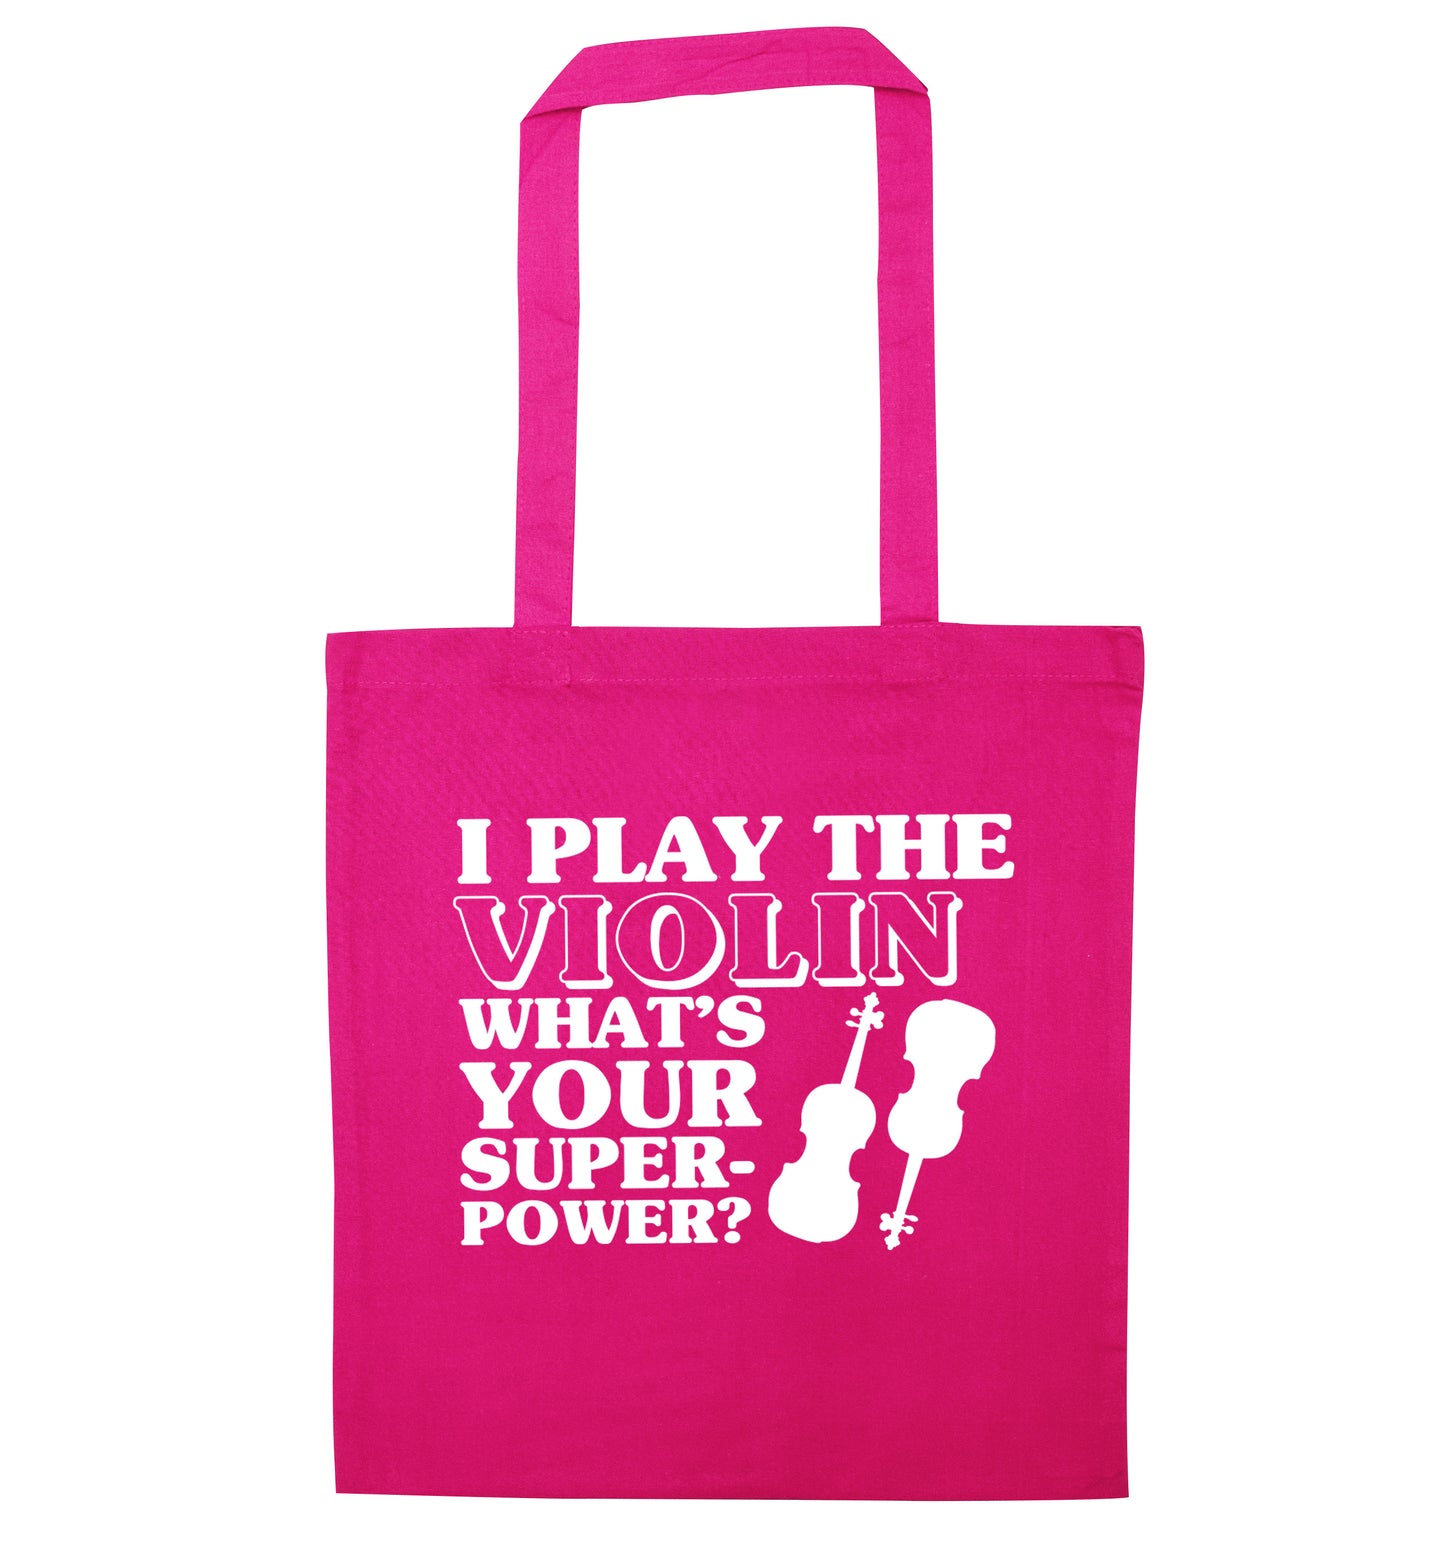 I Play Violin What's Your Superpower? pink tote bag